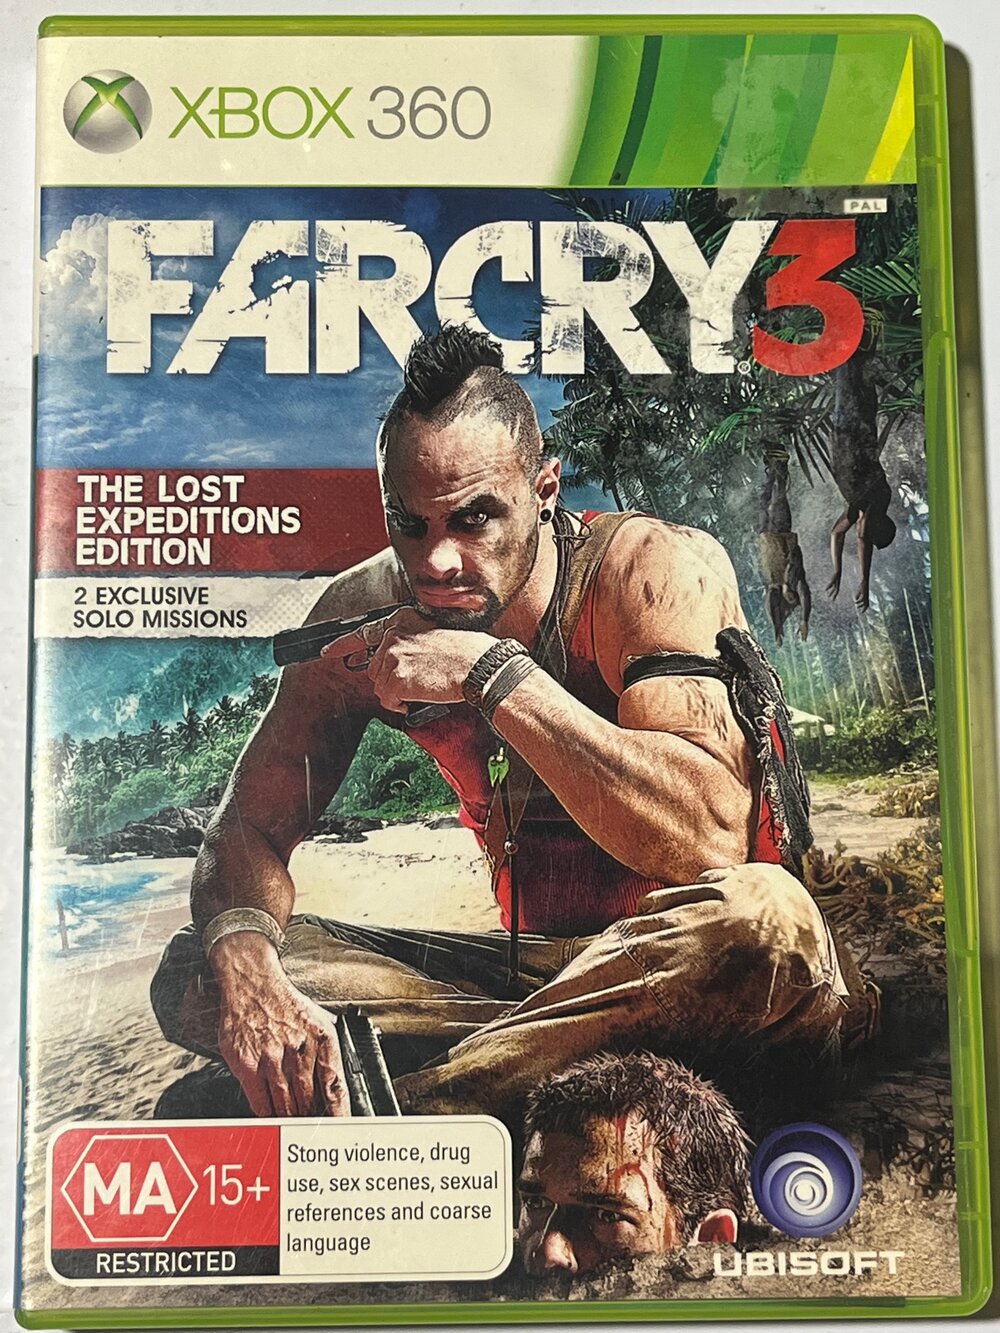 beverly taylor winters recommends farcry 3 sex scene pic